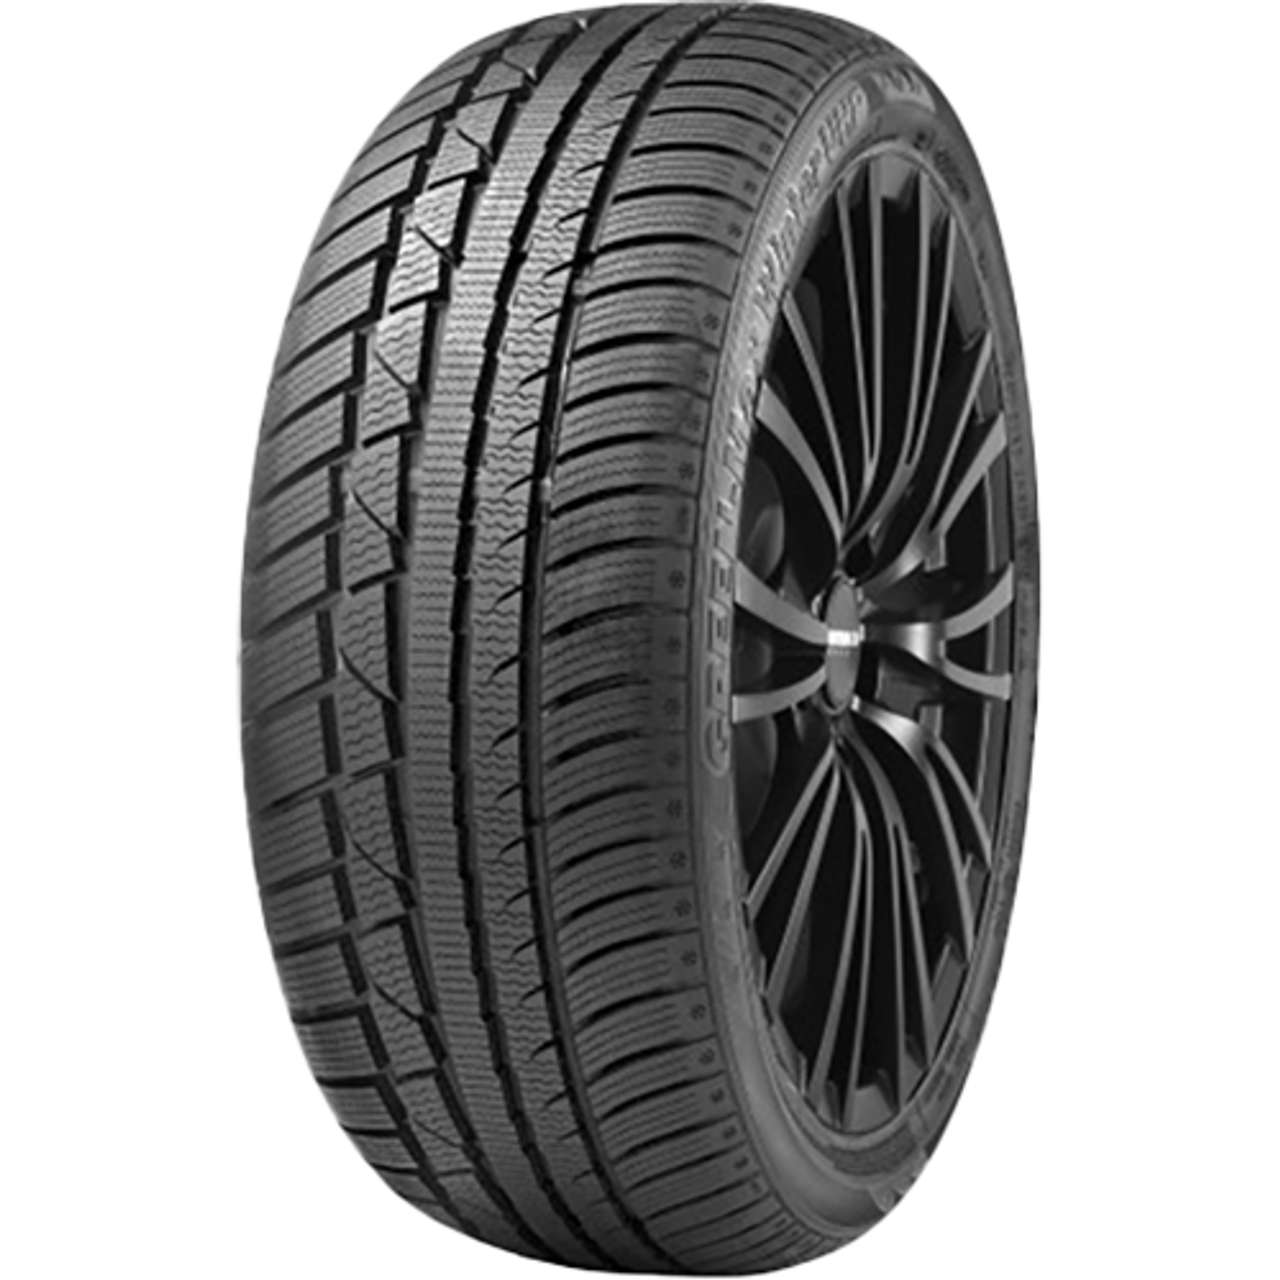 LINGLONG GREEN-MAX WINTER UHP 245/40R18 97V MFS BSW von LINGLONG